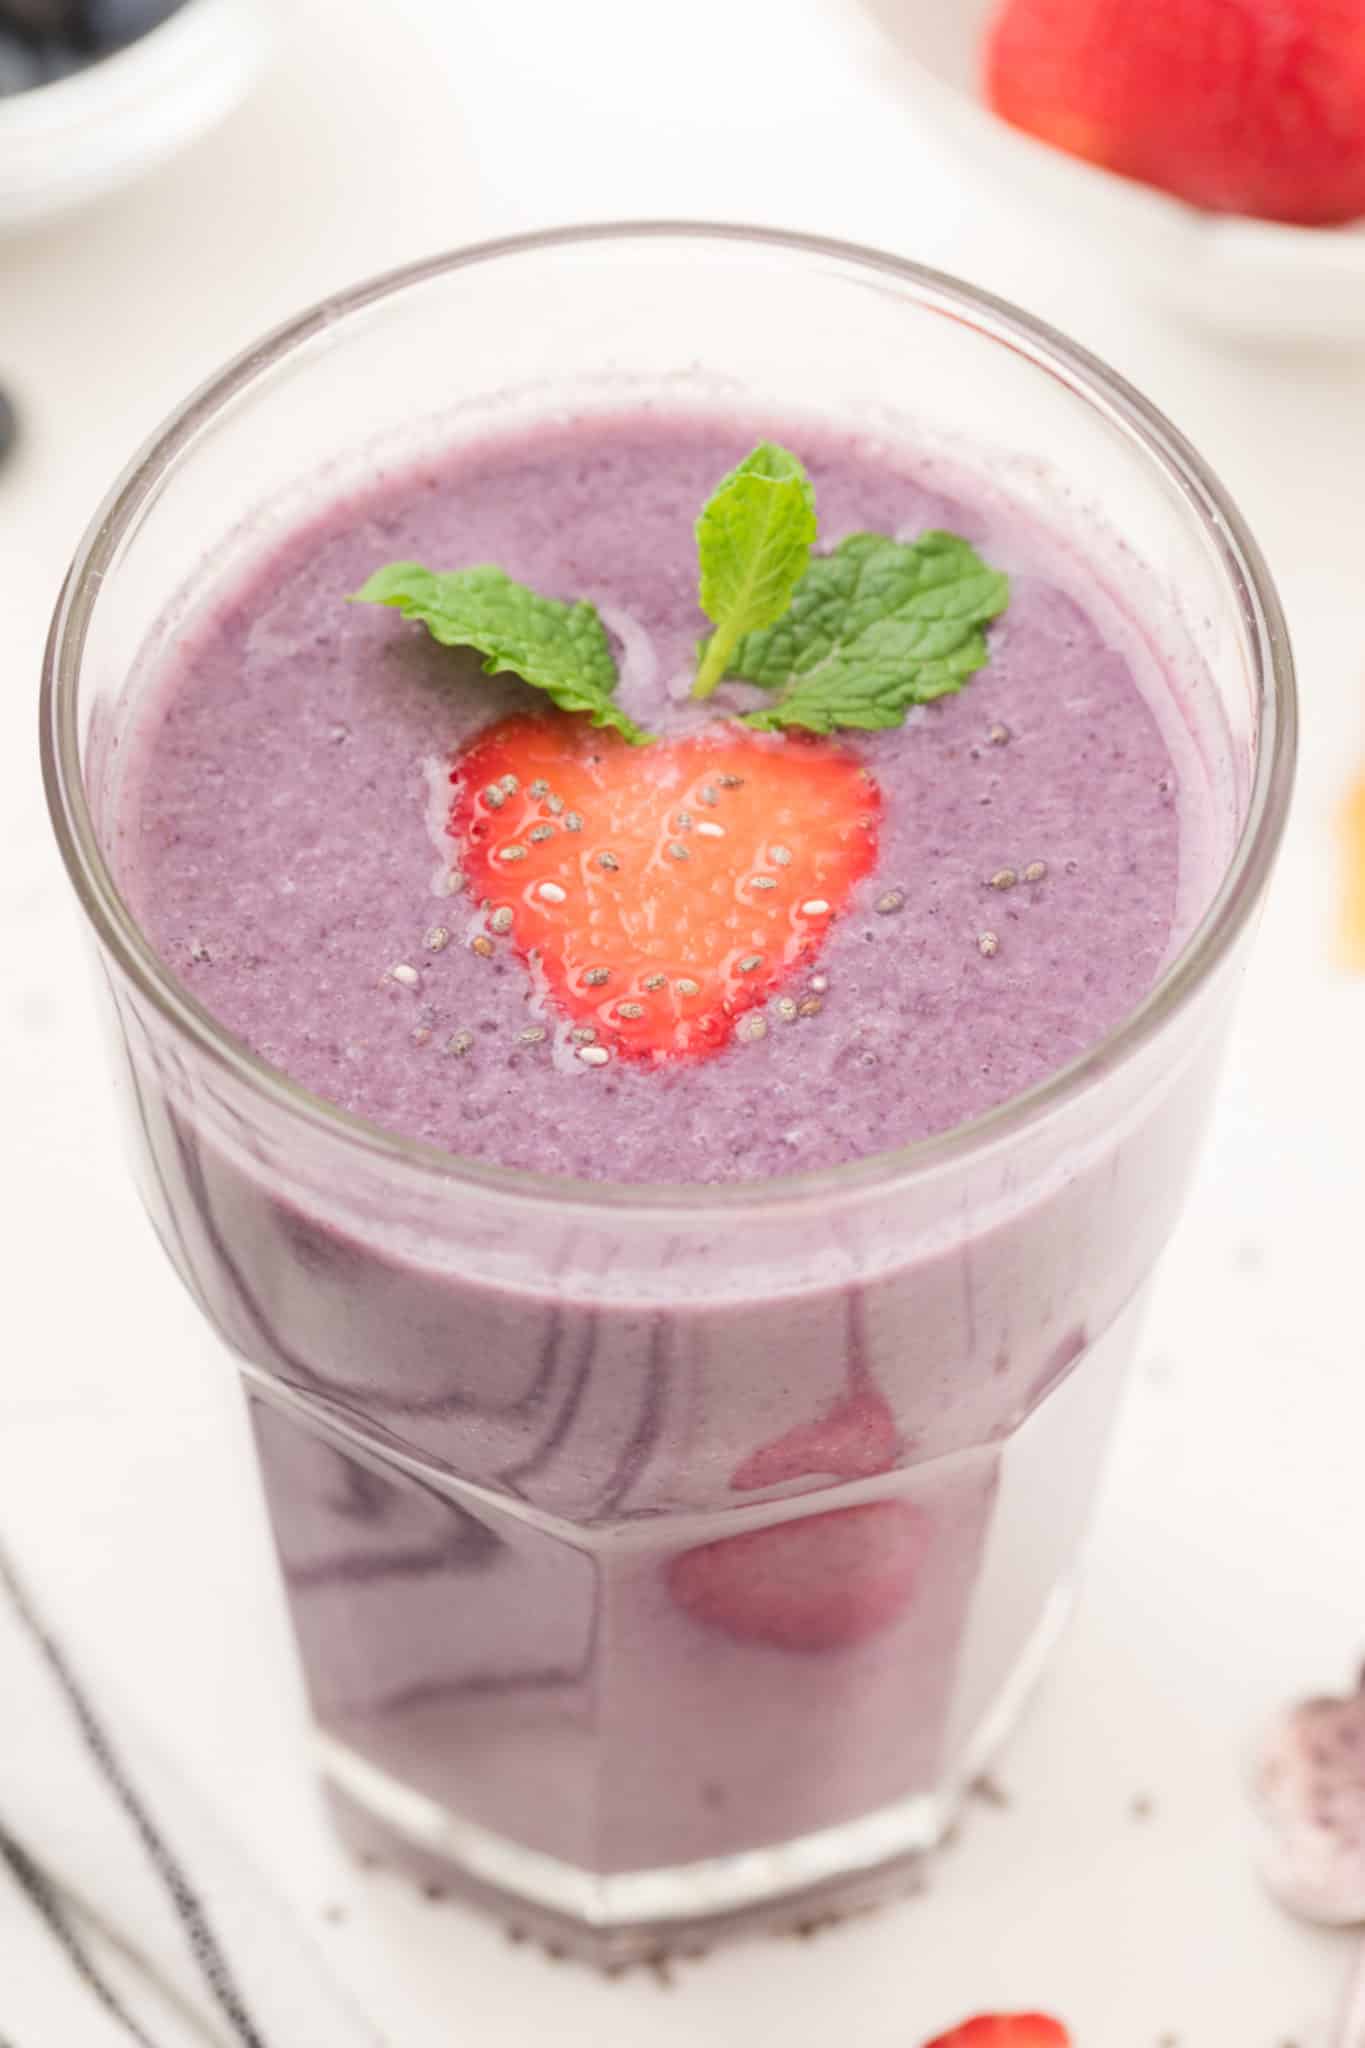 Strawberry and blueberry smoothie in a glass.